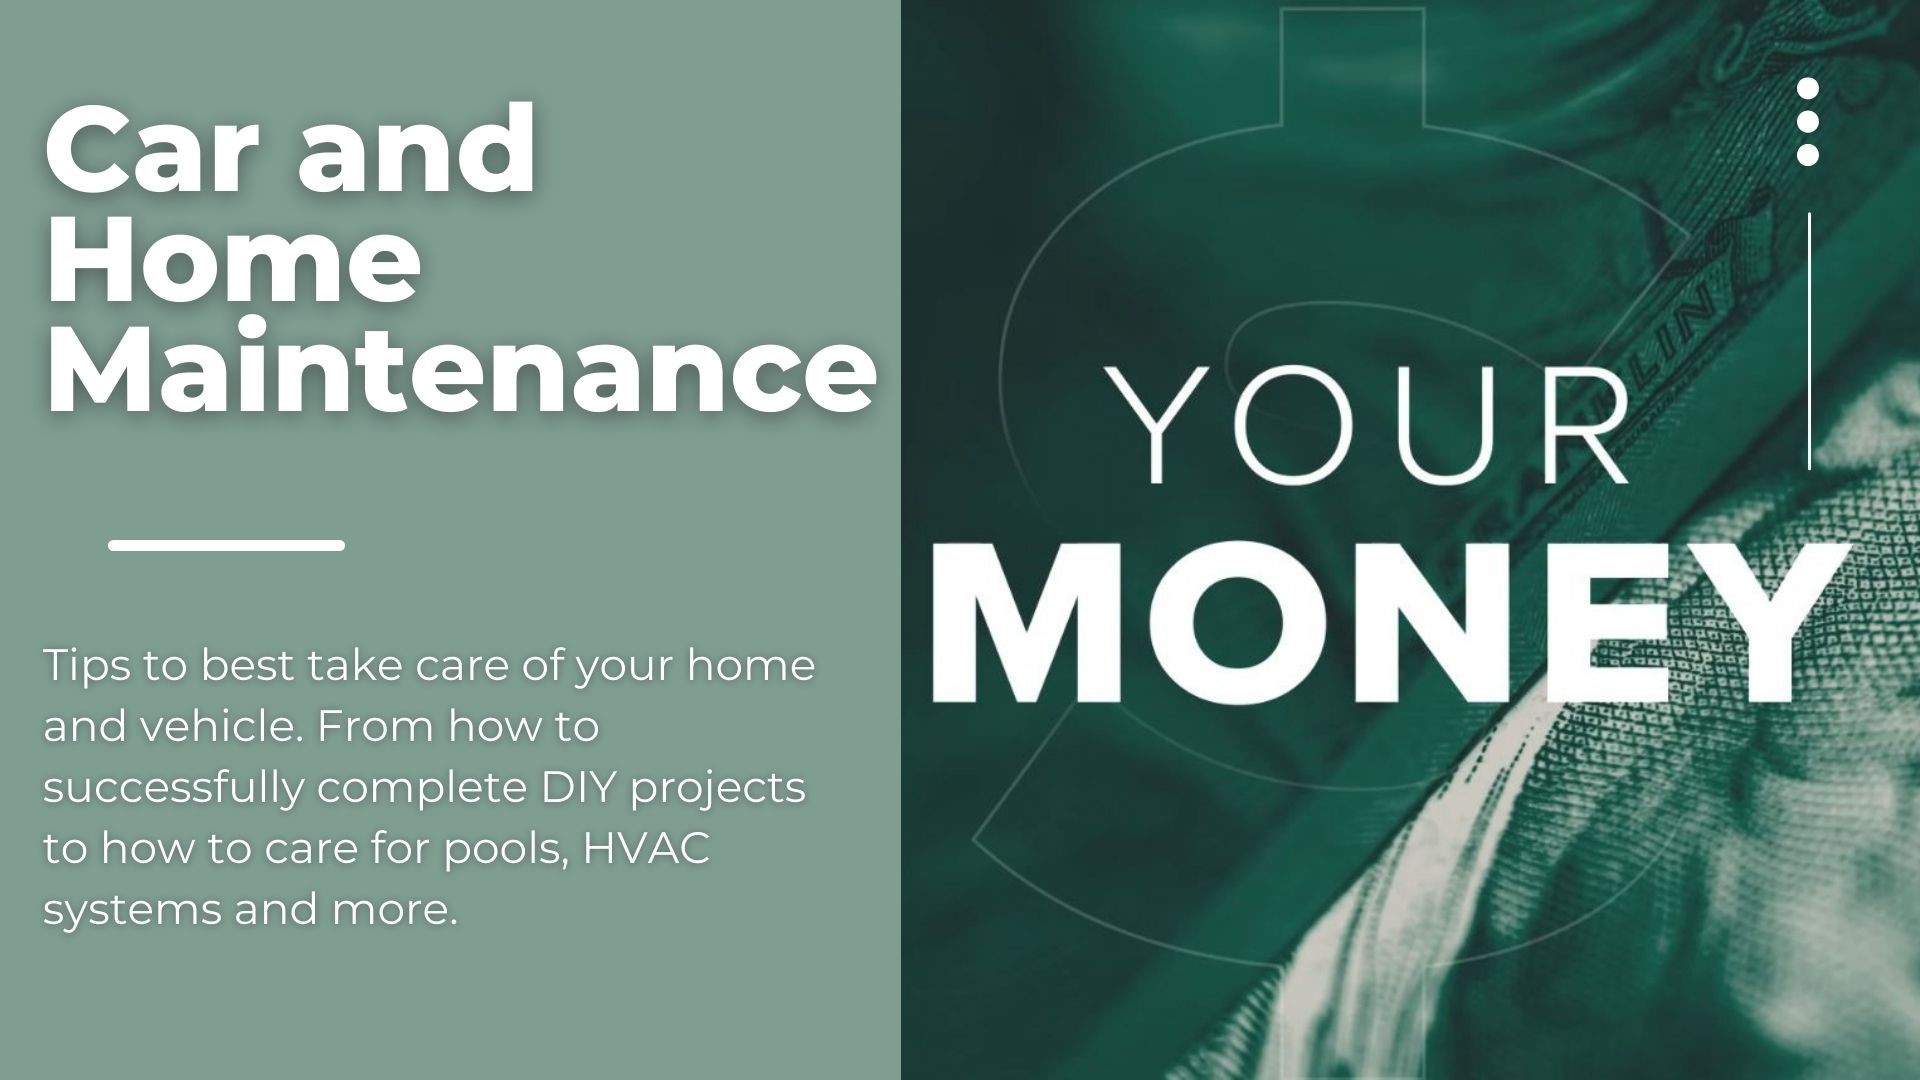 Tips to best take care of your home and vehicle. From how to successfully complete DIY projects to how to care for pools, HVAC systems and more.